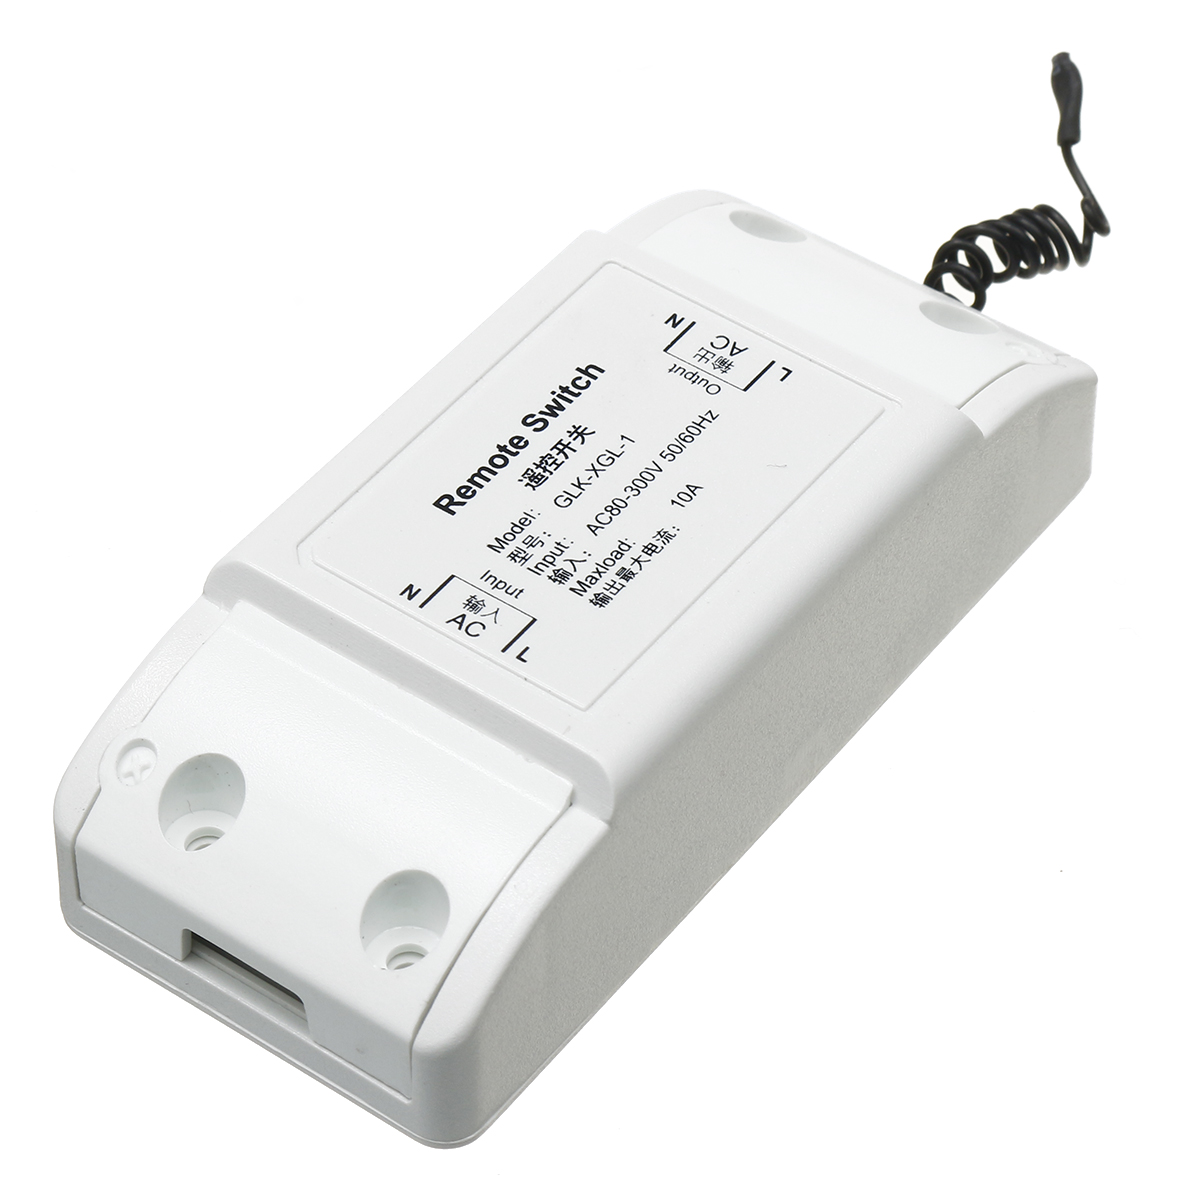 12Way-Lamp-Light-Wireless-Remote-Control-Switch-Receiver-Transmitter-ONOFF-Switch-Controller-1304488-5